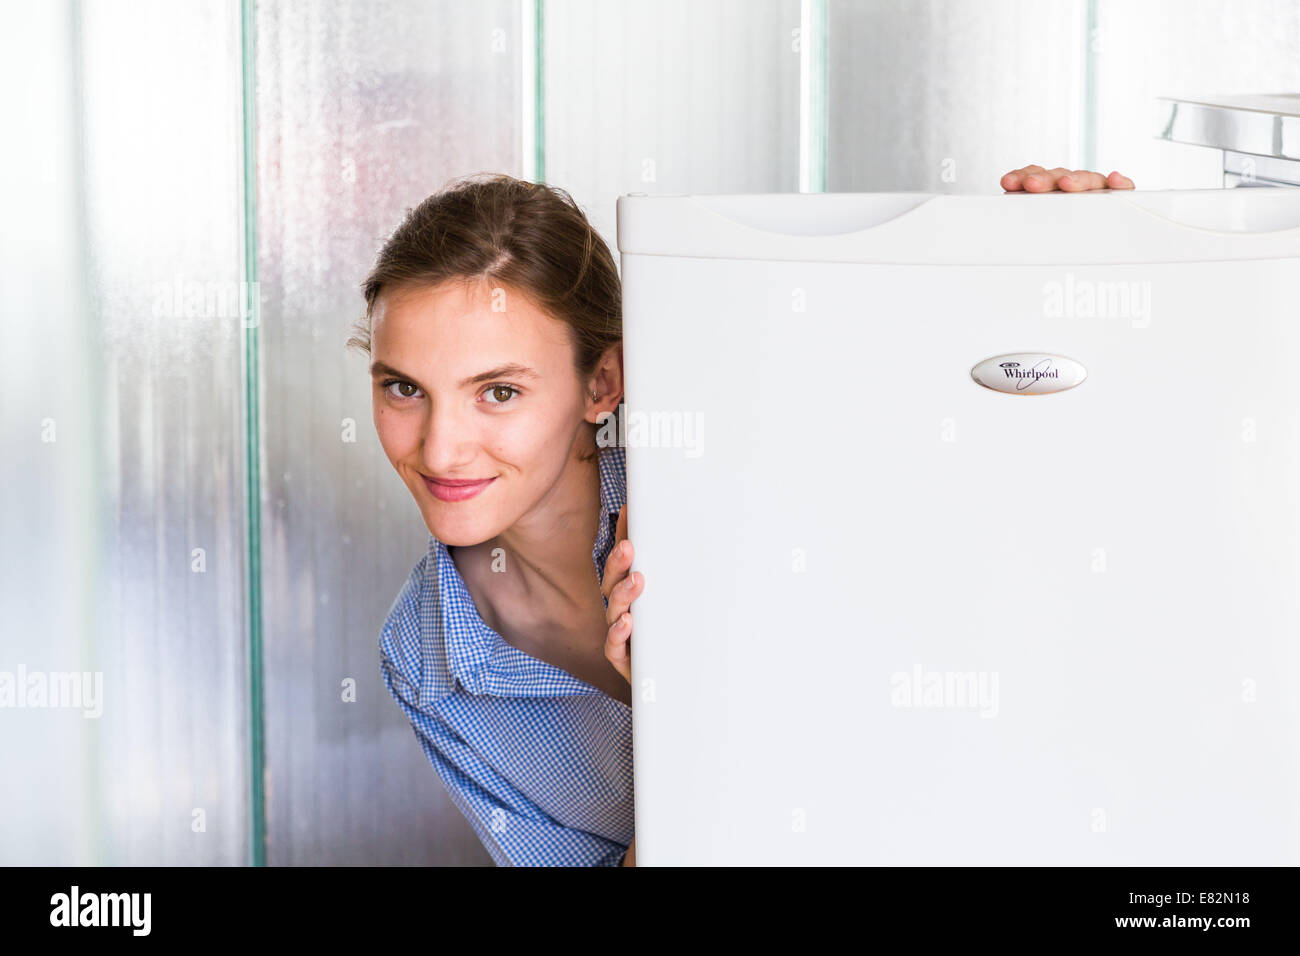 Woman in front of a refrigerator. Stock Photo